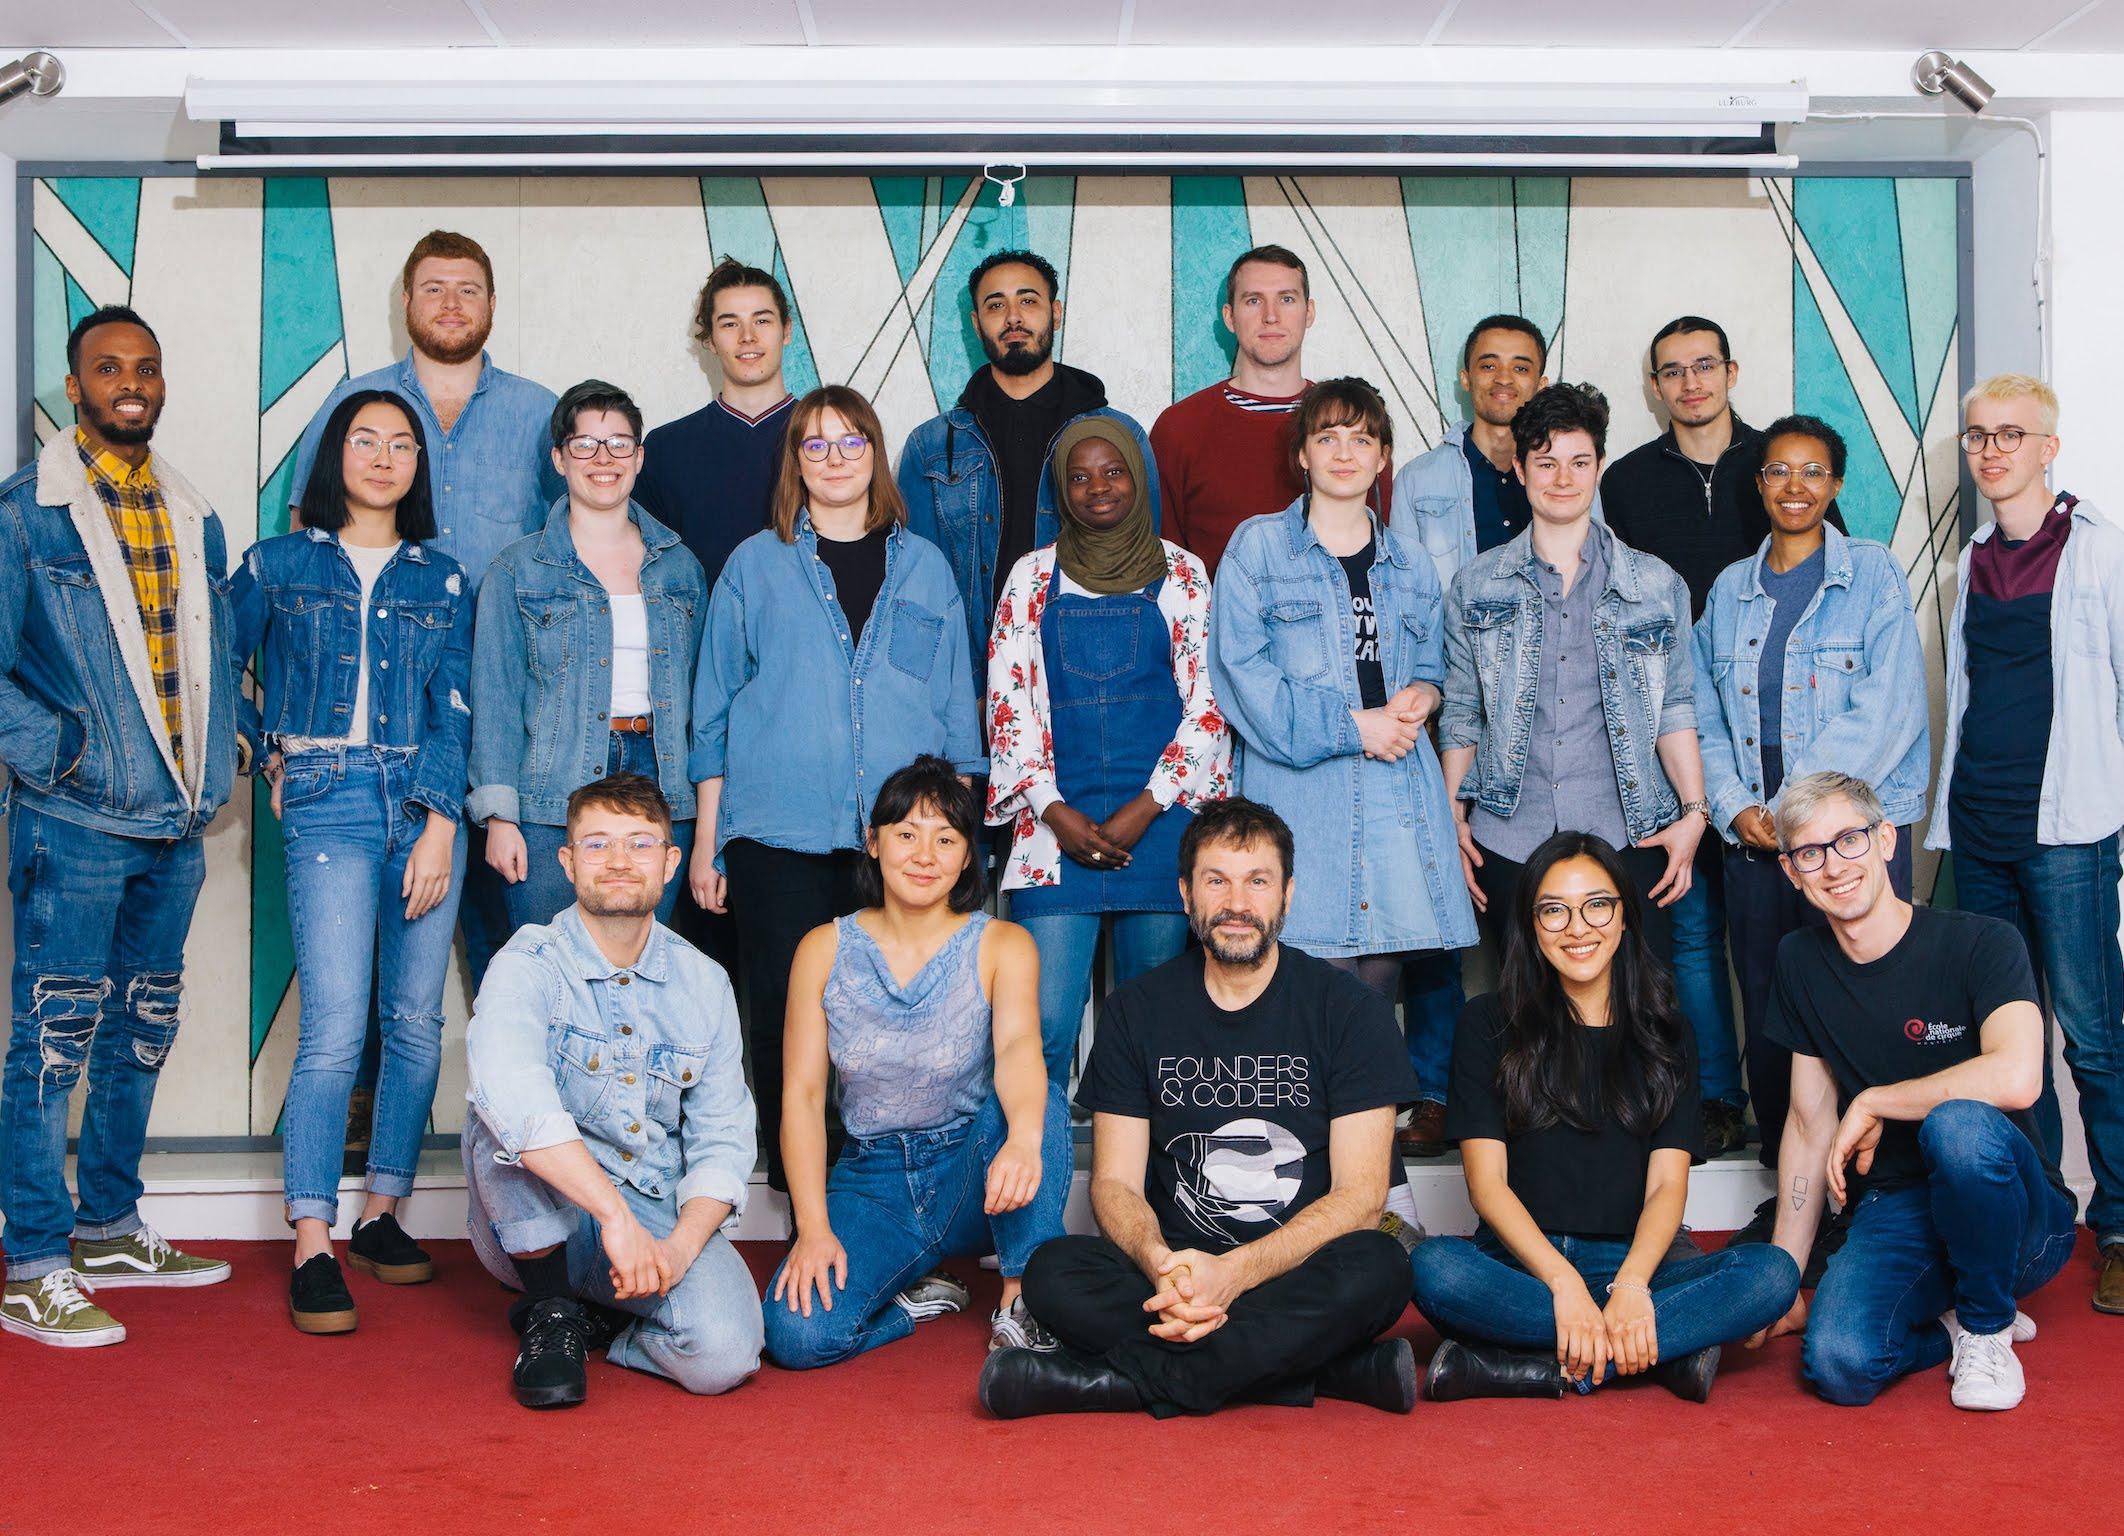 The sixteenth cohort of Founders and Coders, a free coding academy in Islington